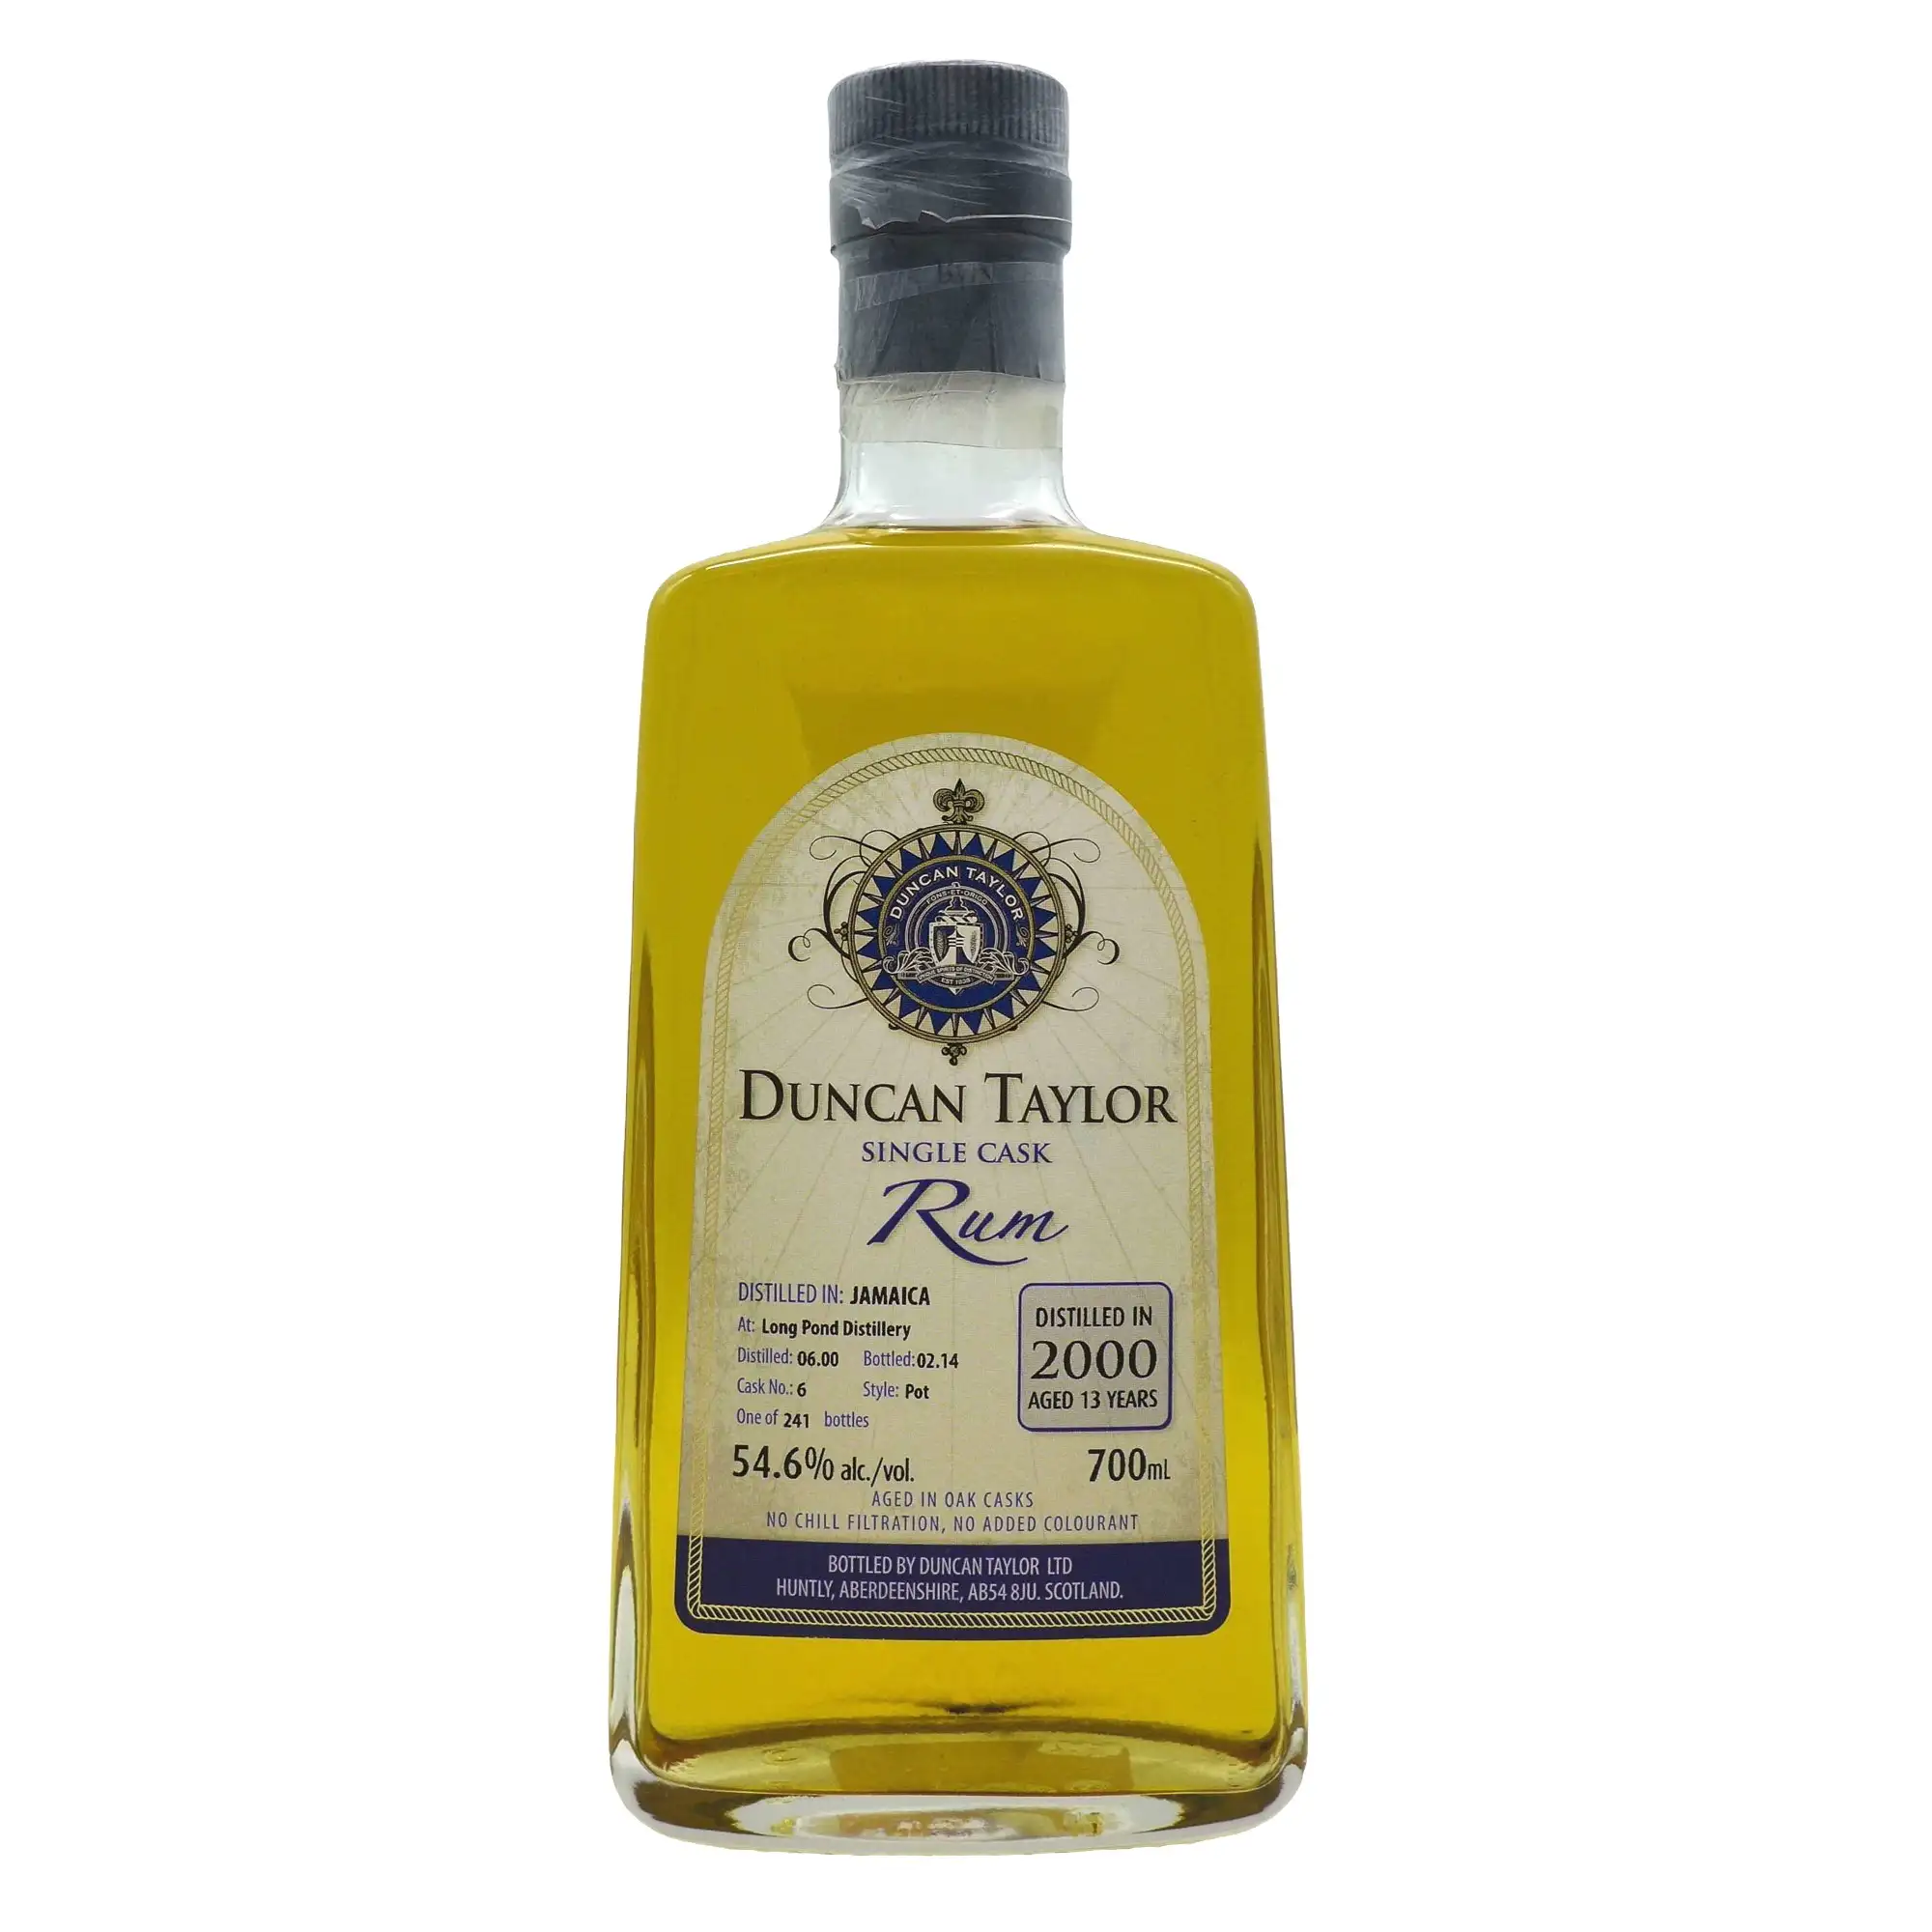 Image of the front of the bottle of the rum Single Cask Rum